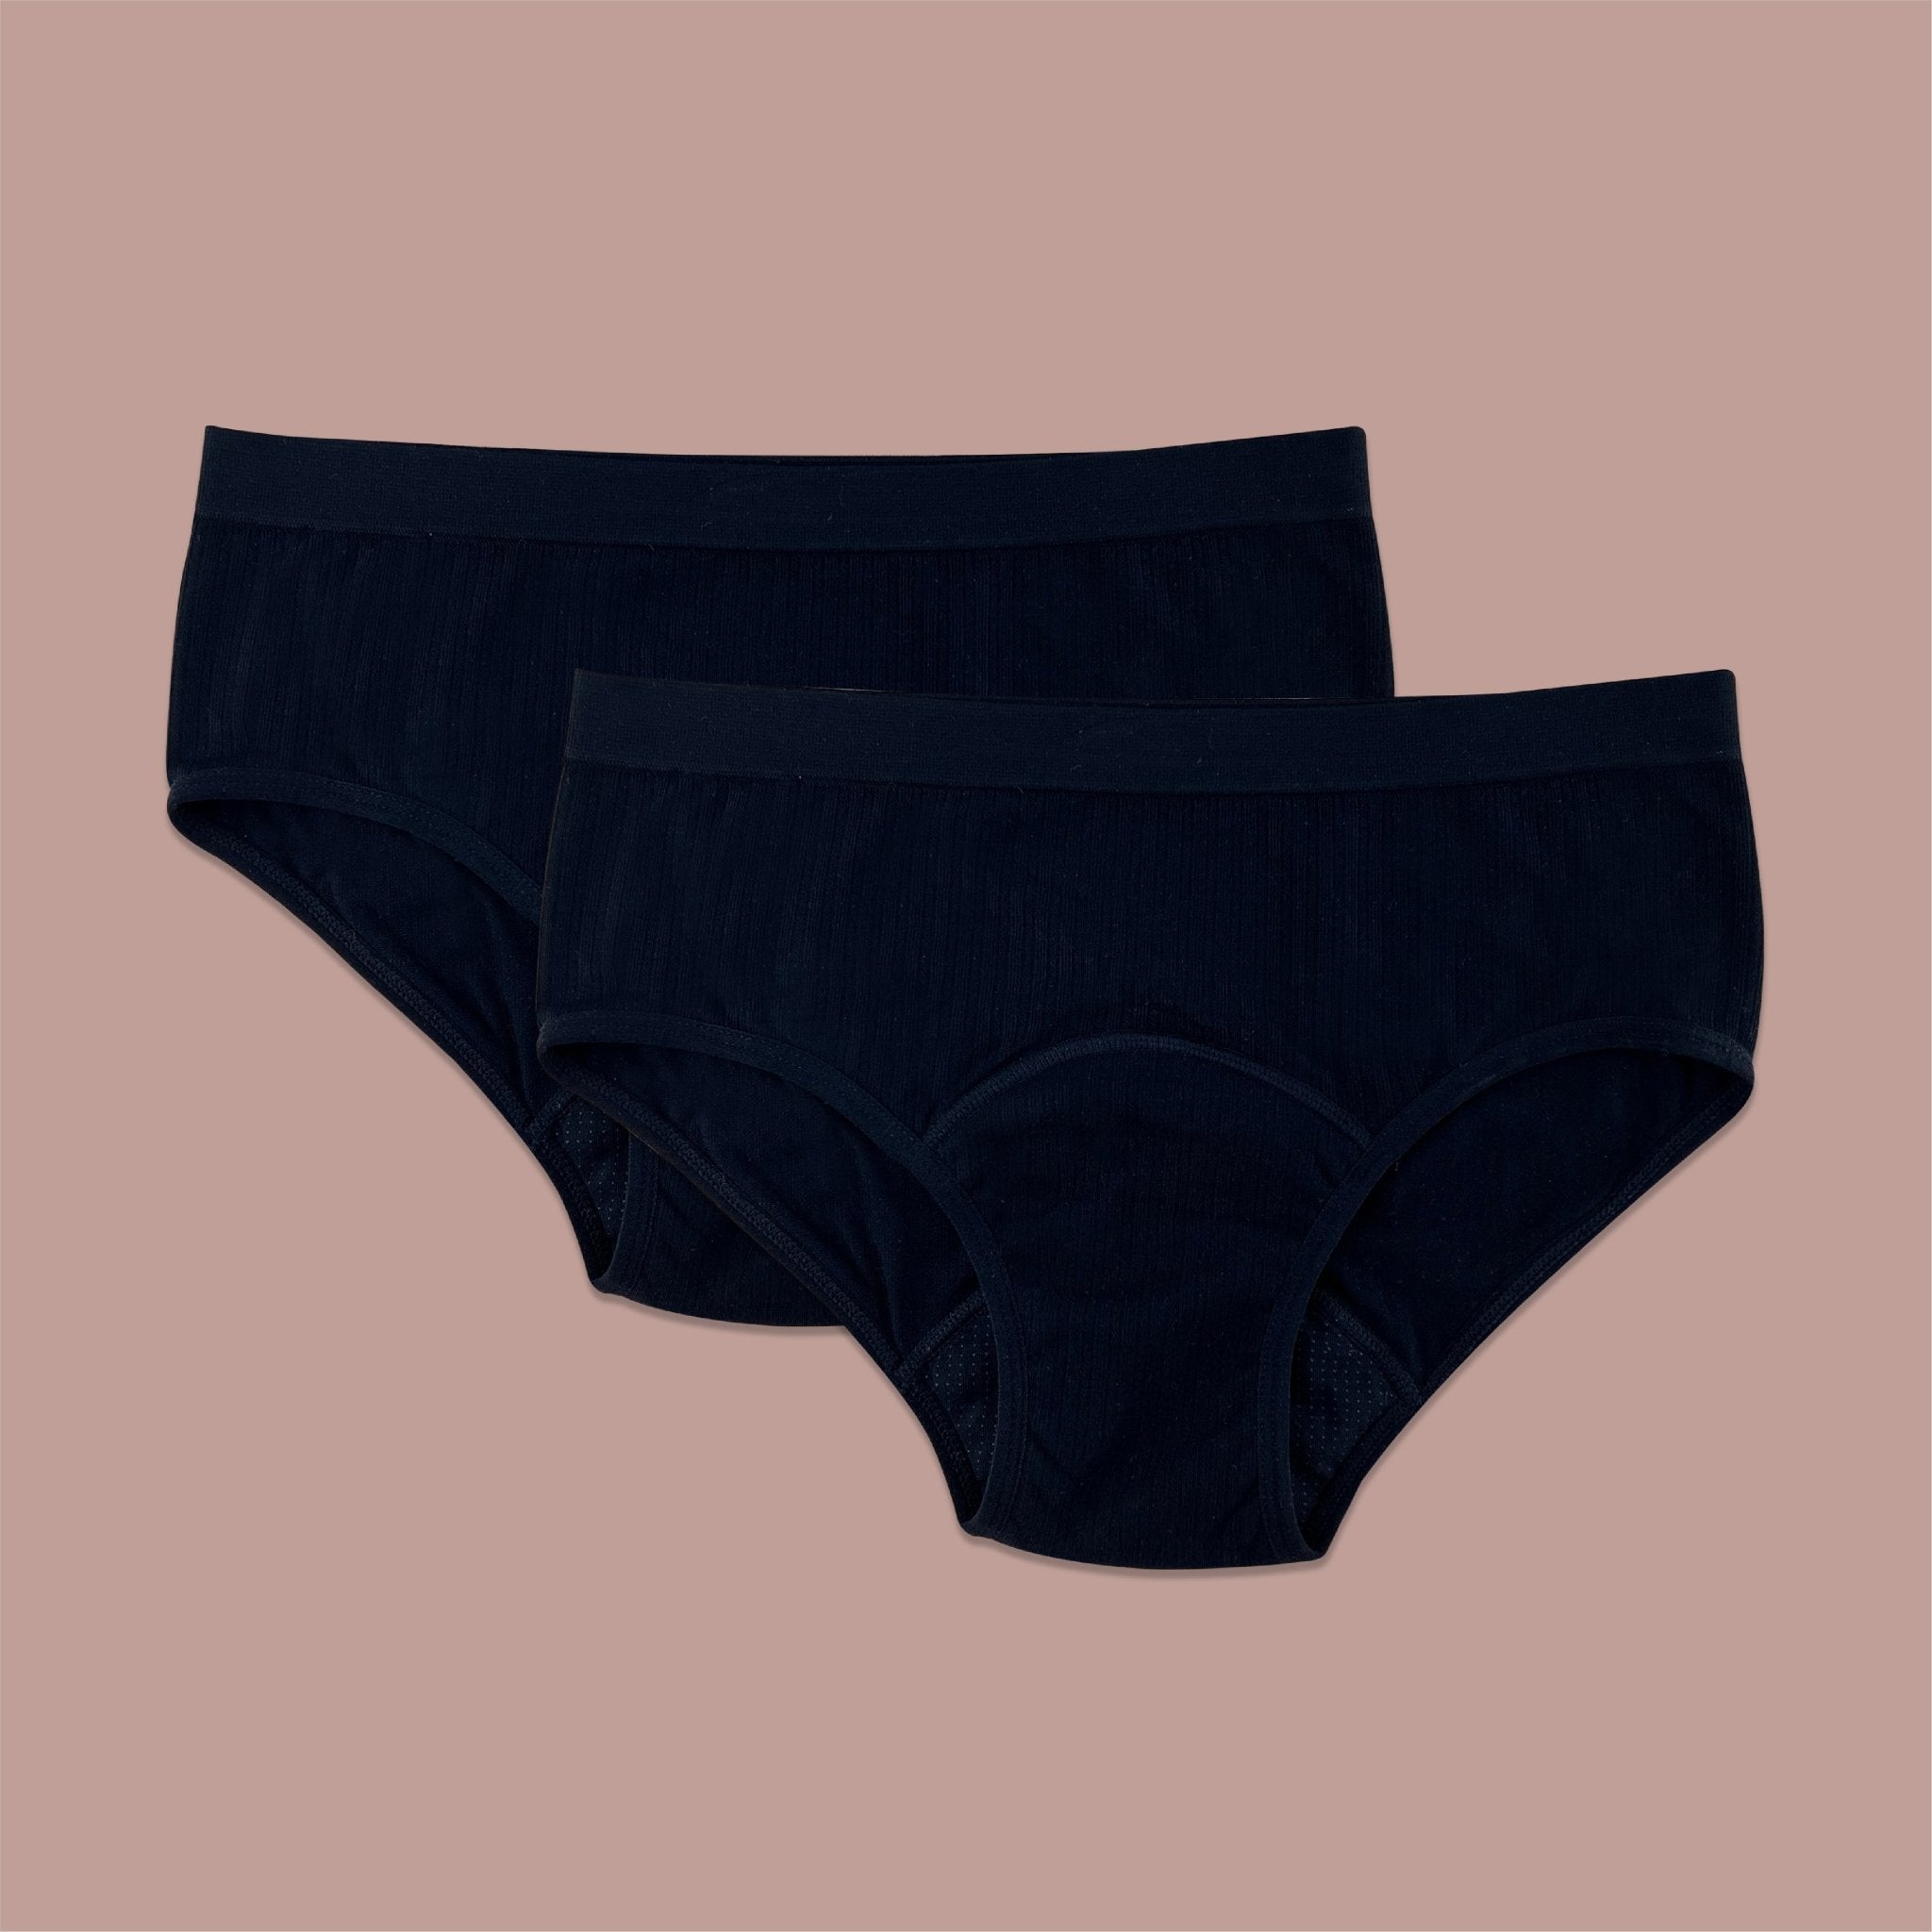 SNUGGS For Light and Moderate Flow, Size XS - Menstruation Underwear